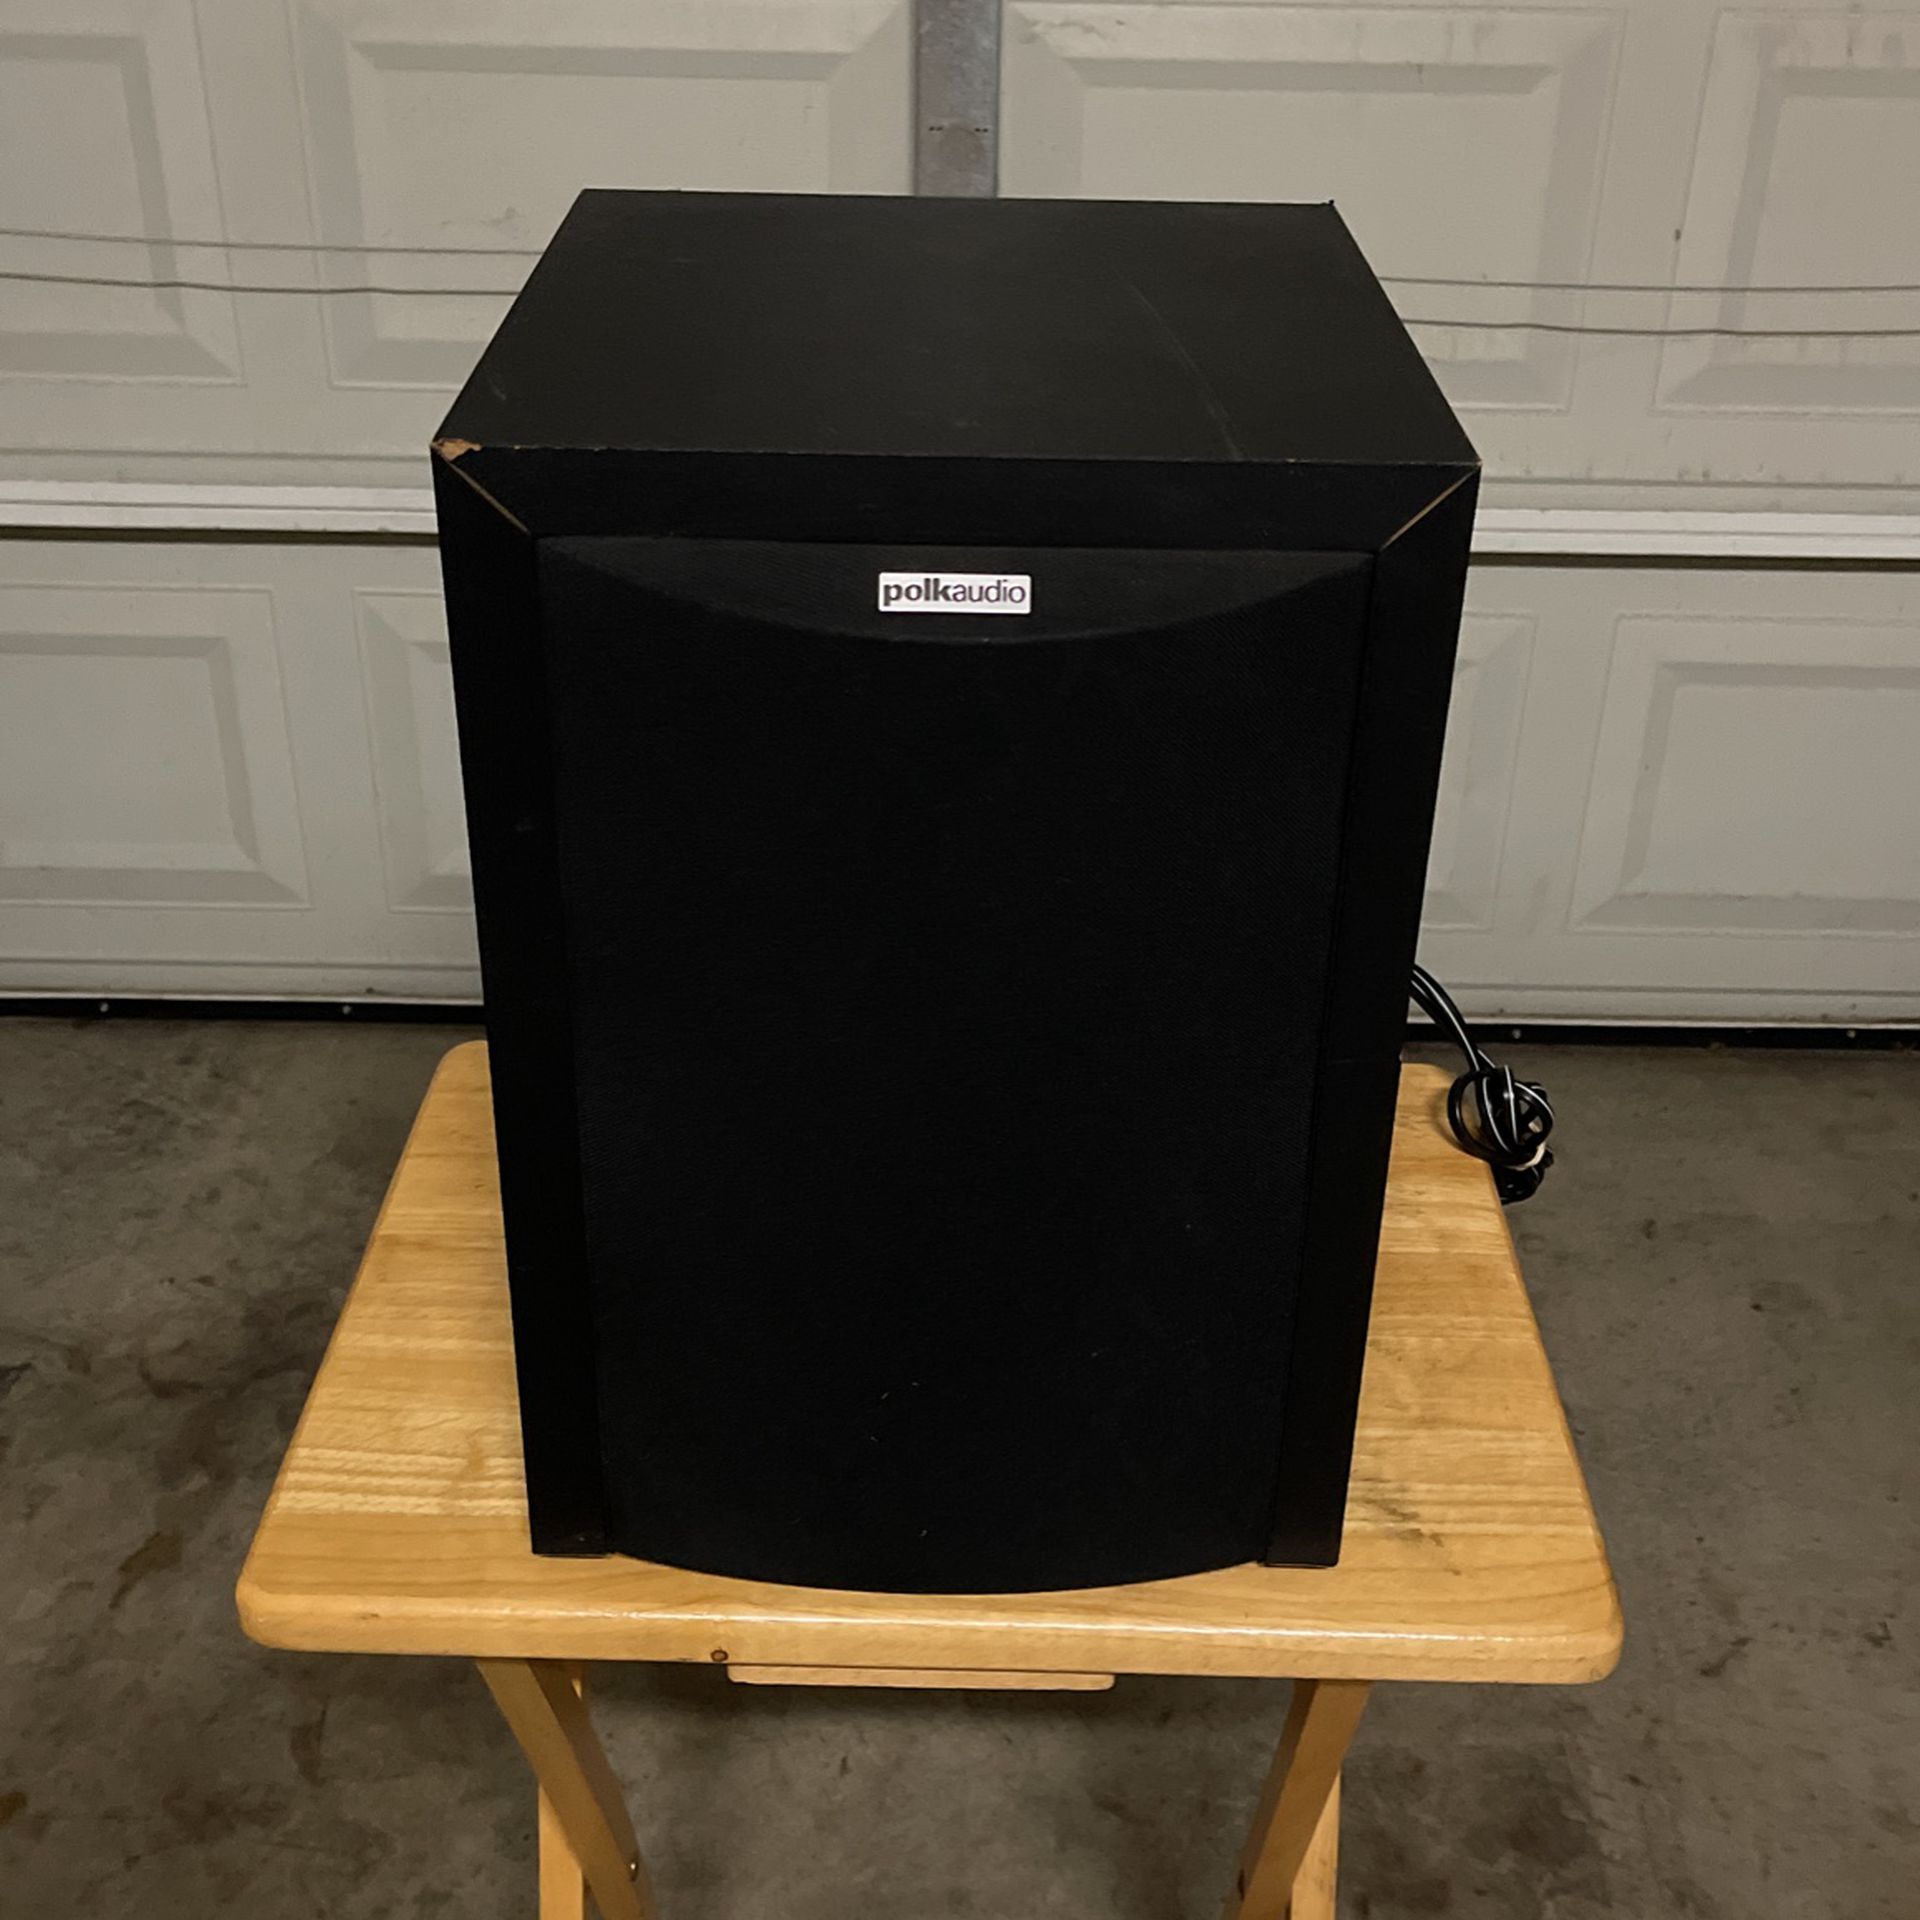 Polk Audio RM6750 Powered Subwoofer 8" Sub 120v 100 Watts Tested & Working Great